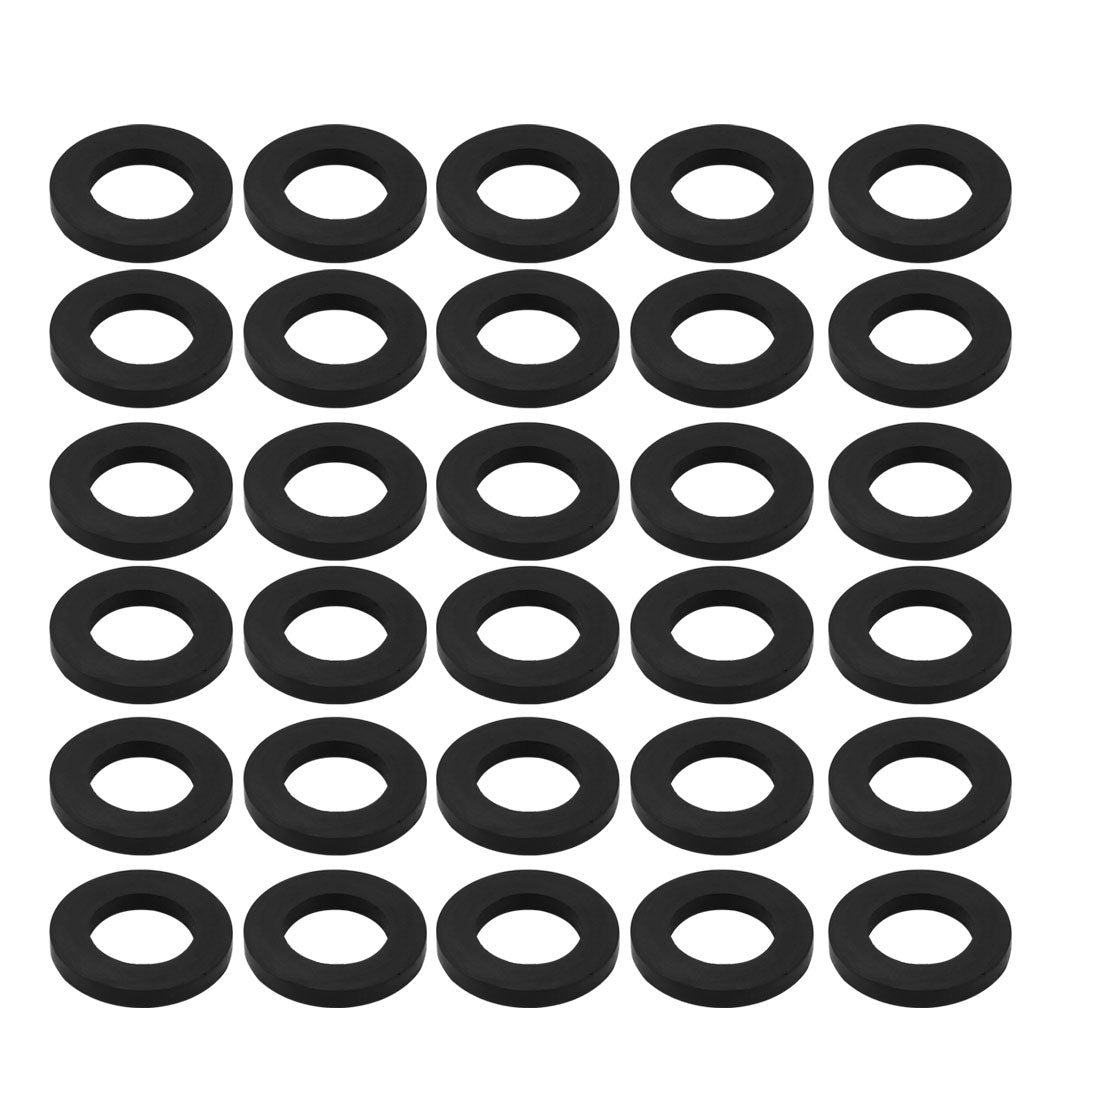 Uxcell Uxcell 30pcs Black Rubber Round Flat Washer Assortment Size 14x24x3mm Flat Washer